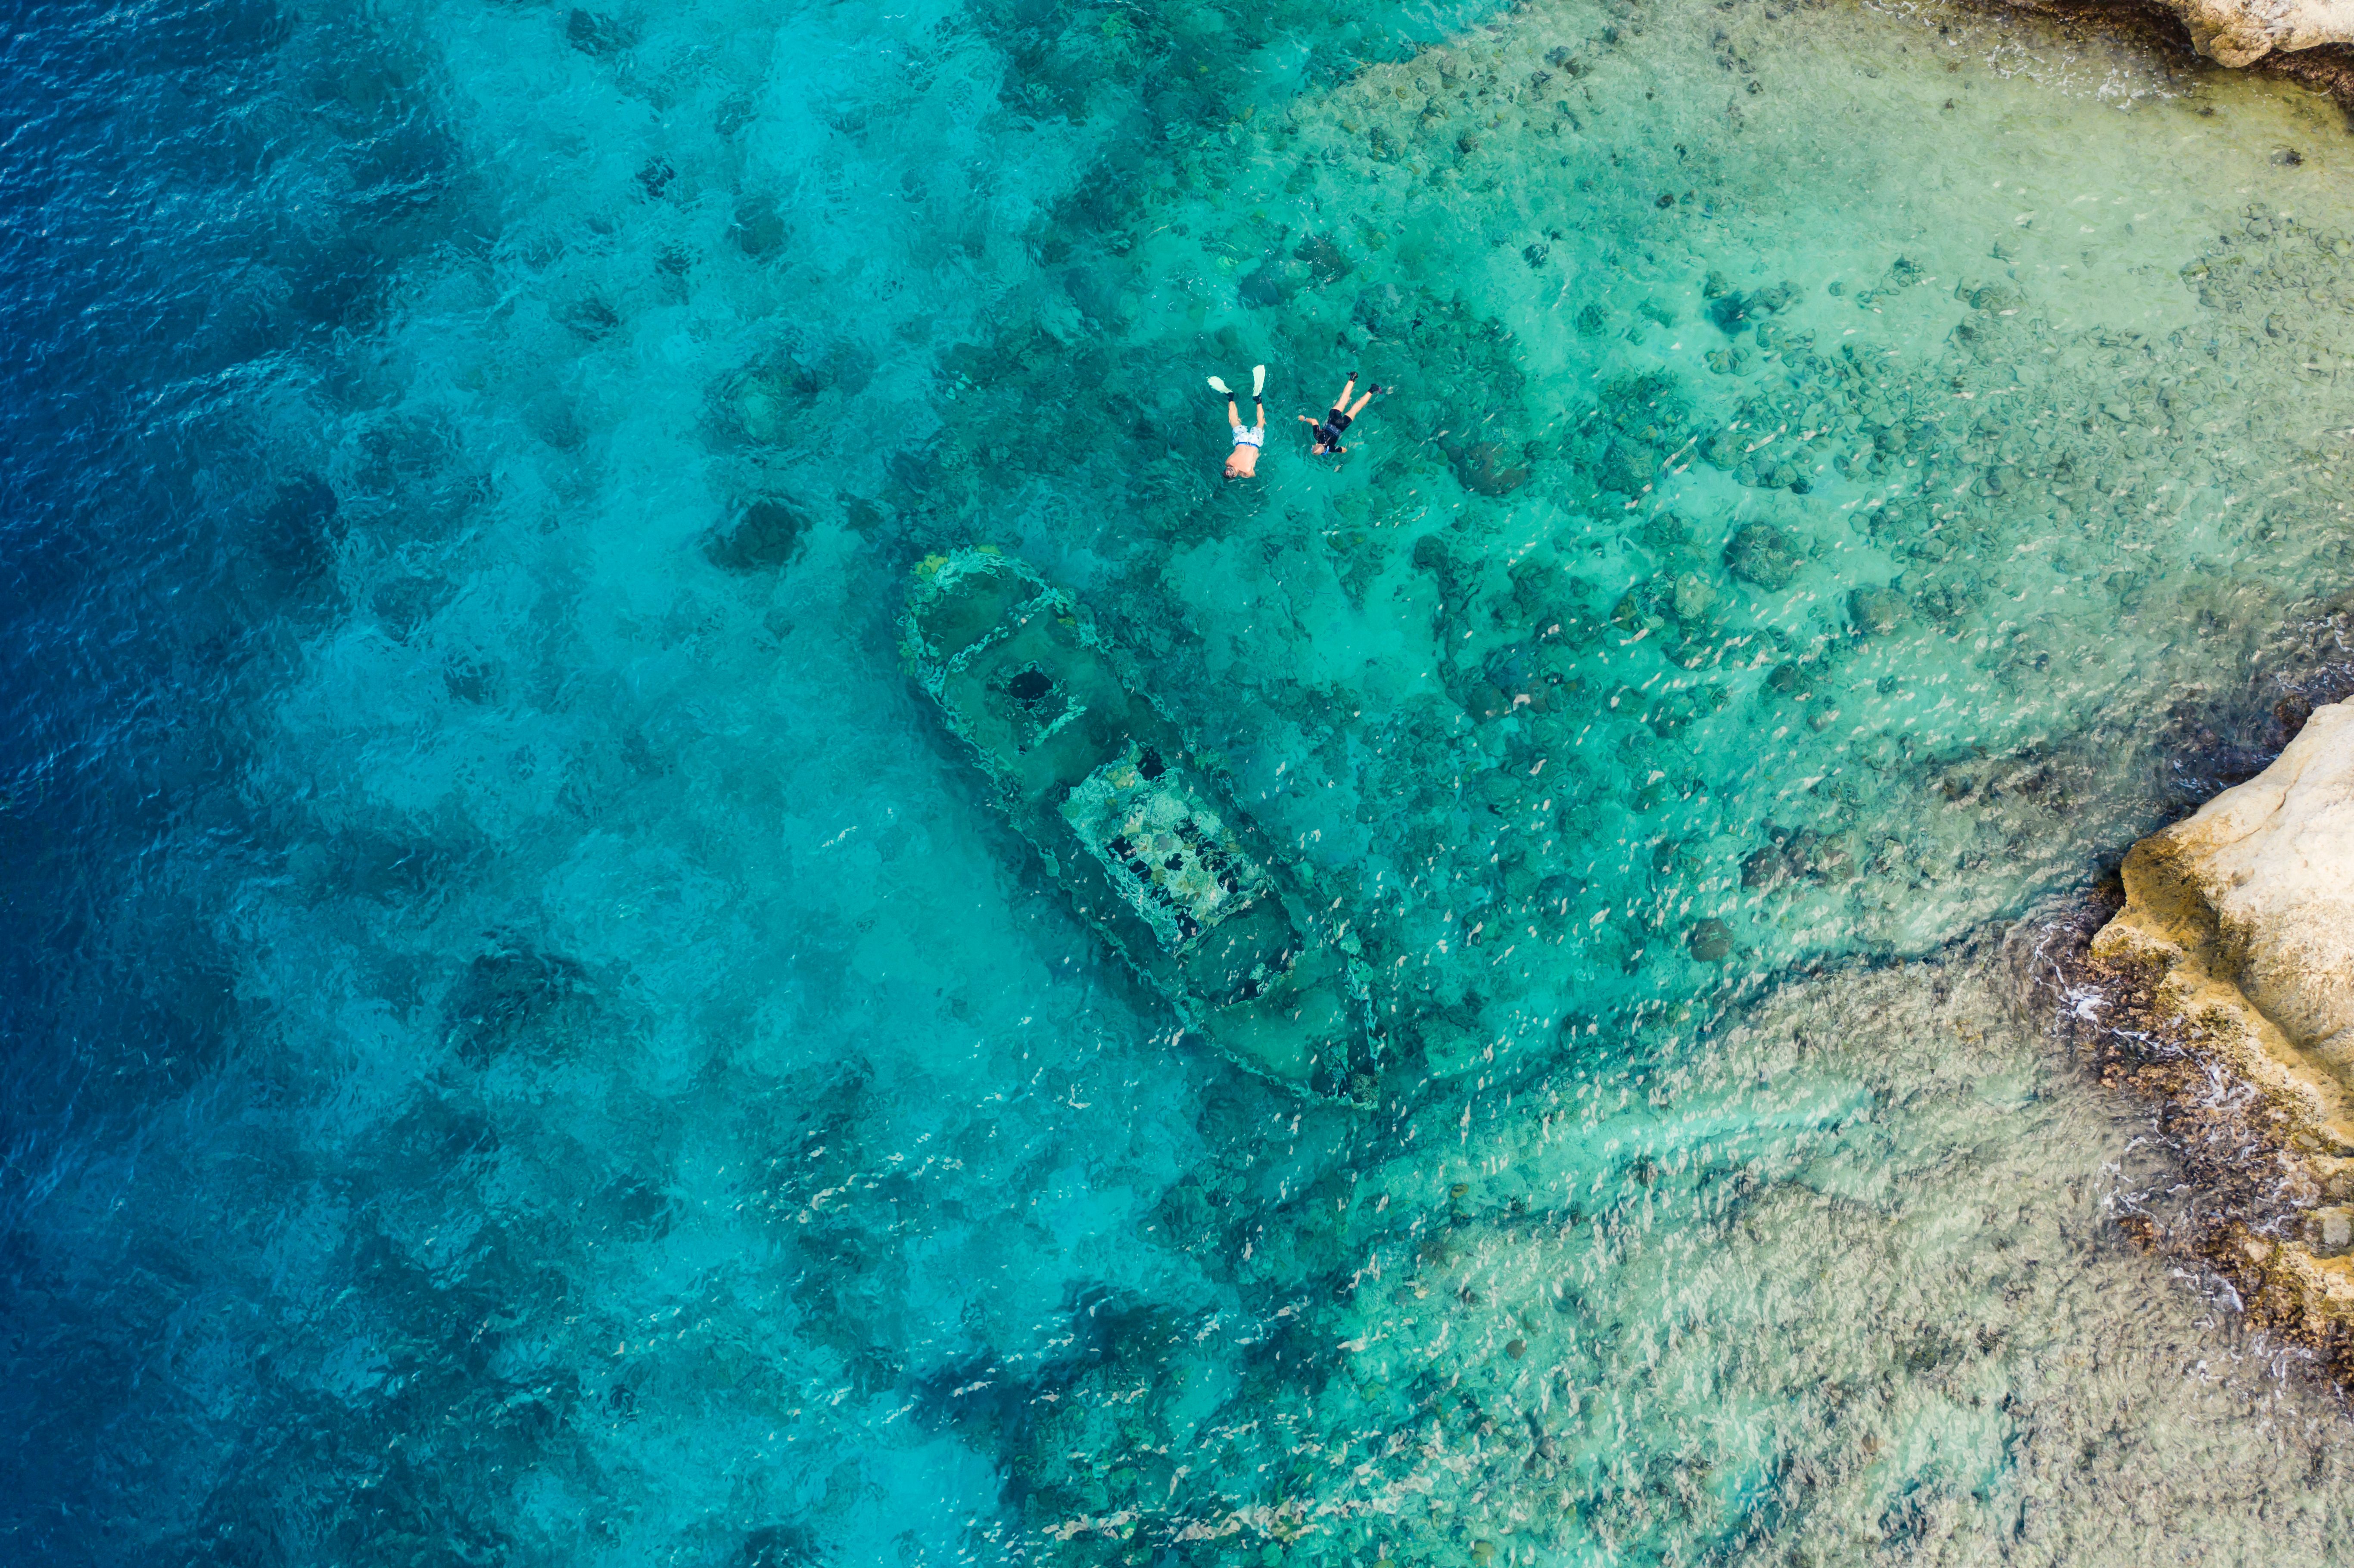 Aerial view of snorkelers exploring a sunken tugboat in the clear turquoise waters off Tugboat Beach, Curacao, with visible coral reefs and rocky shore.